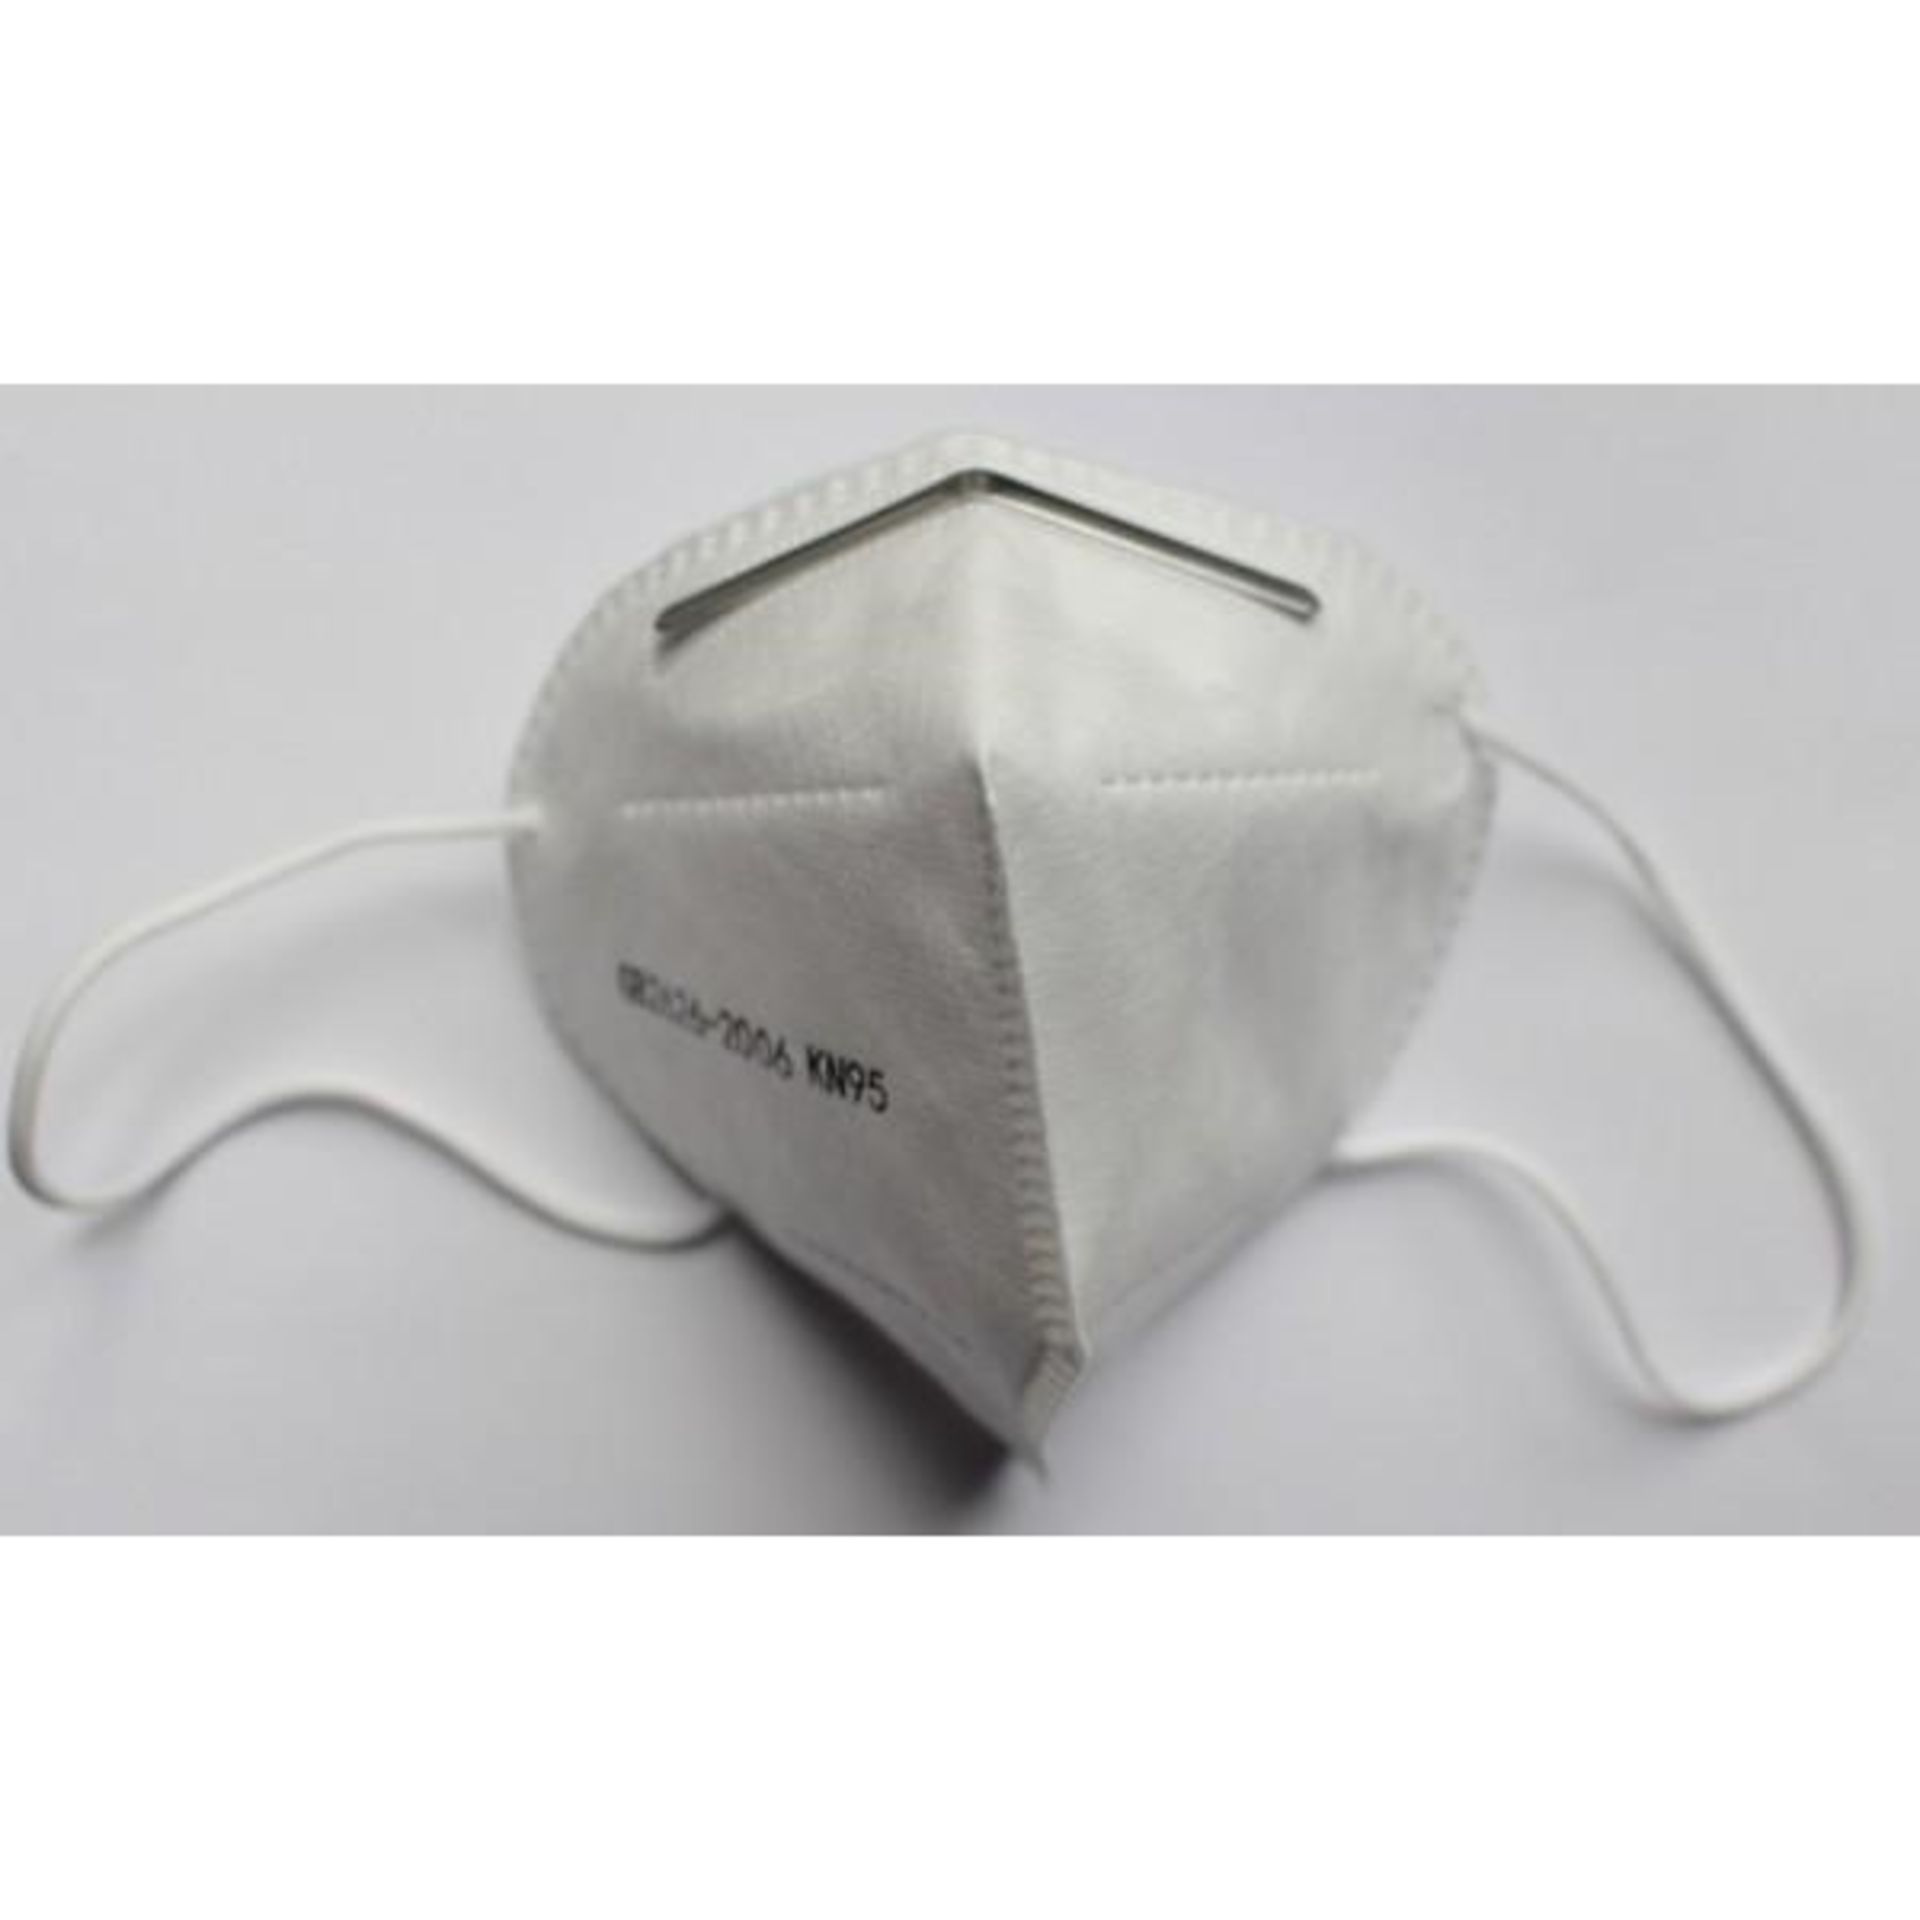 50 x Kinetic KN95 Protective Face Masks - FFP2 Grade - Meets WHO Guidance - Certified & Tested - Image 6 of 9